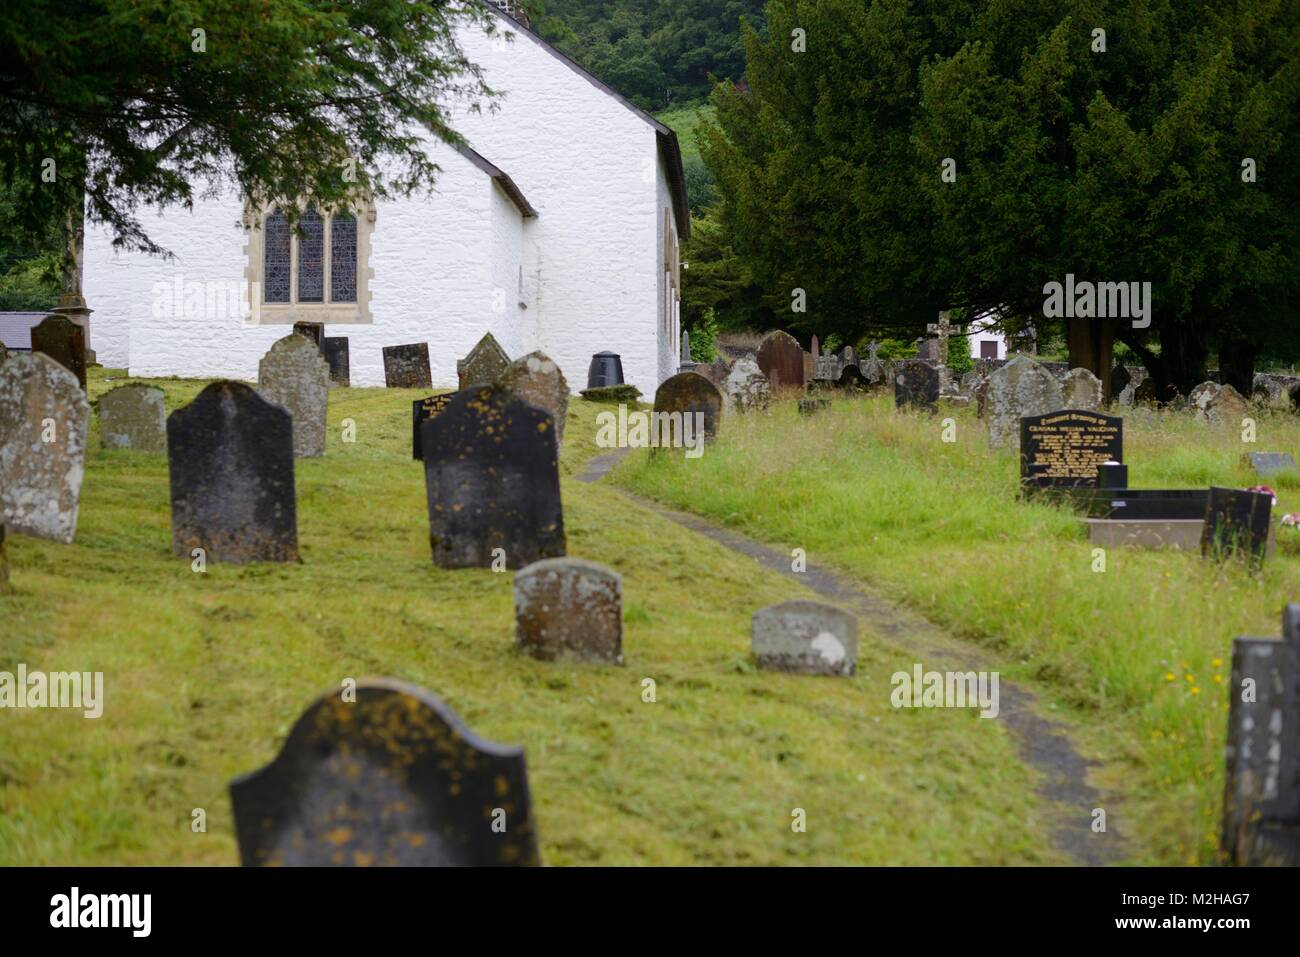 St Michaels Church, Talley, built from the stone of the ruined abbey in the 18th Century, Wales, UK. Stock Photo